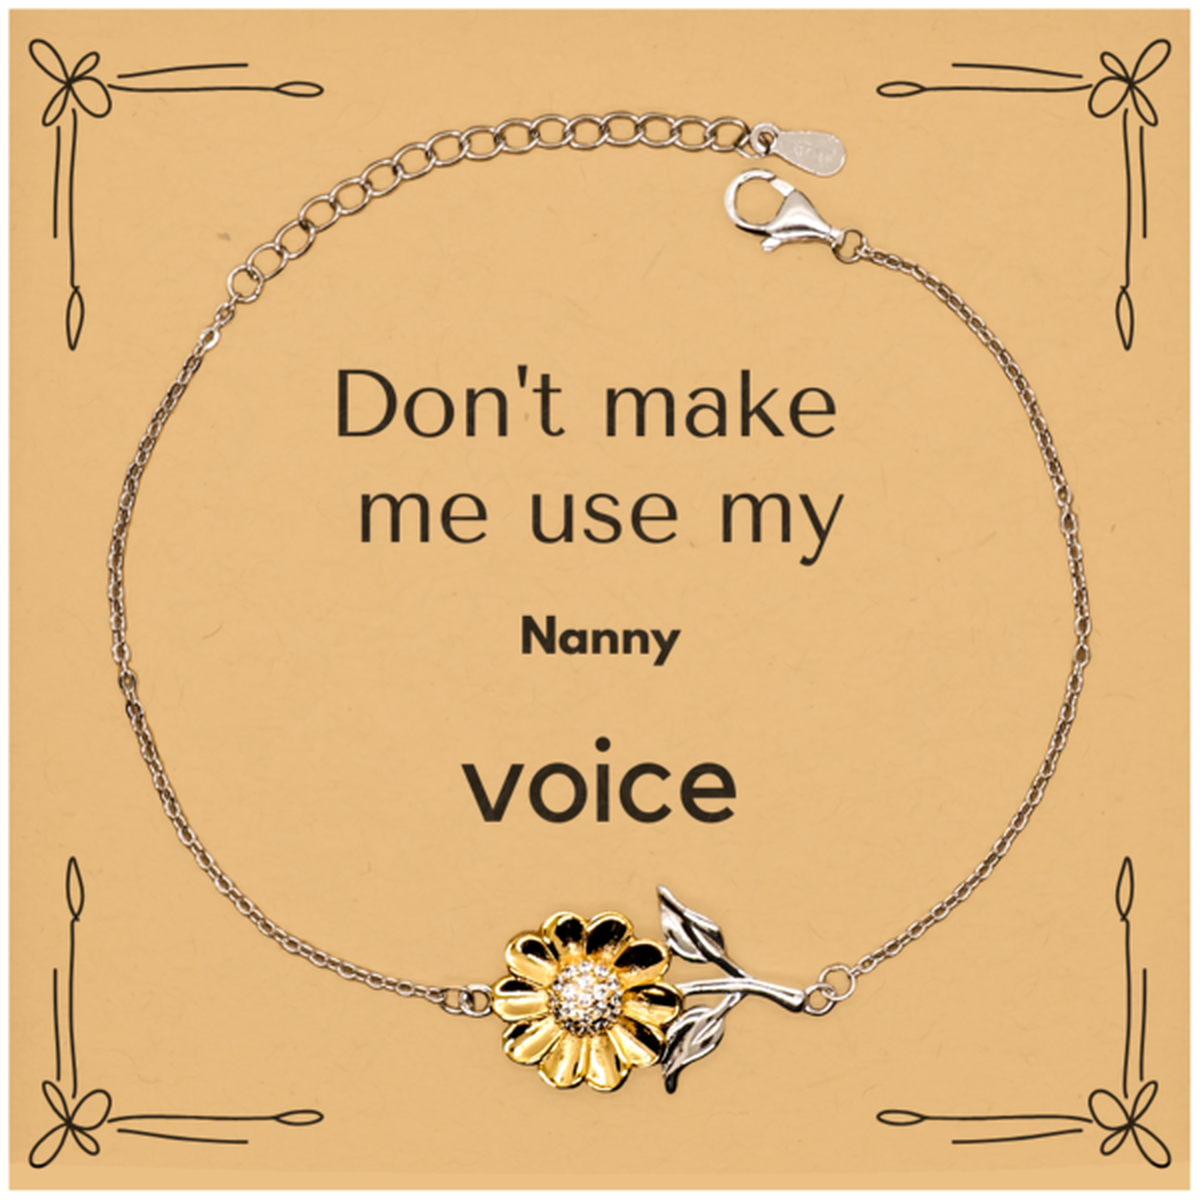 Don't make me use my Nanny voice, Sarcasm Nanny Card Gifts, Christmas Nanny Sunflower Bracelet Birthday Unique Gifts For Nanny Coworkers, Men, Women, Colleague, Friends